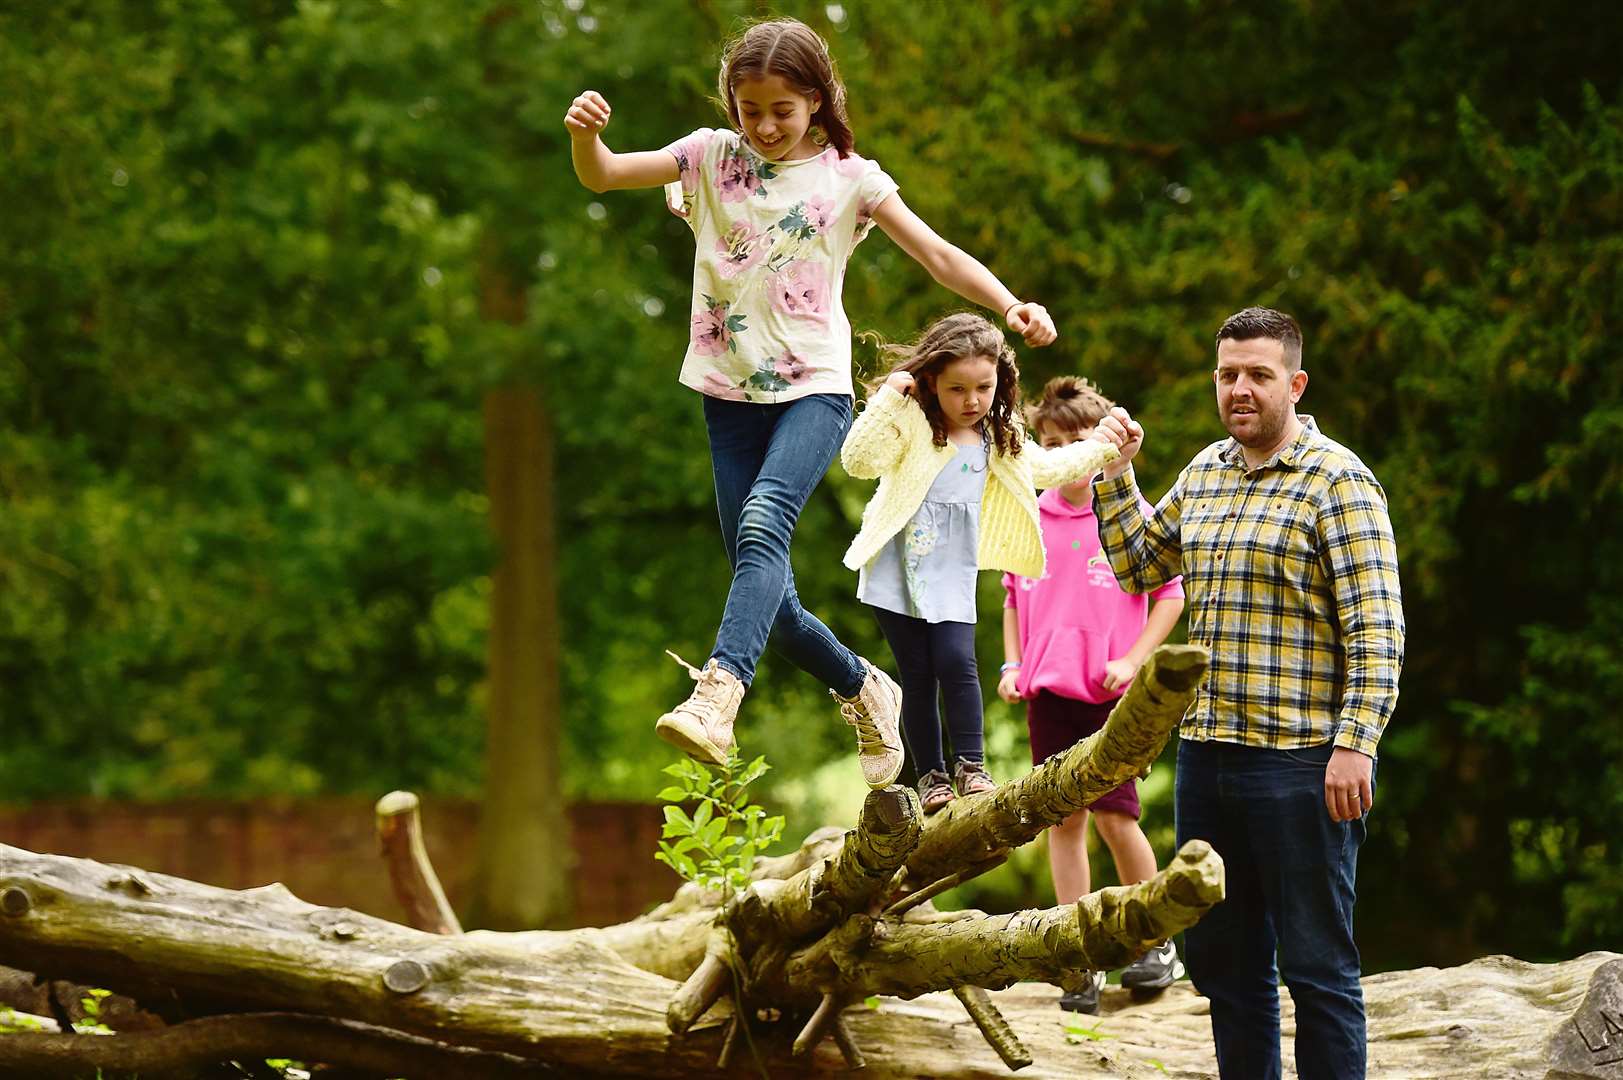 The National Trust has a packed programme of outdoor events and activities for half term